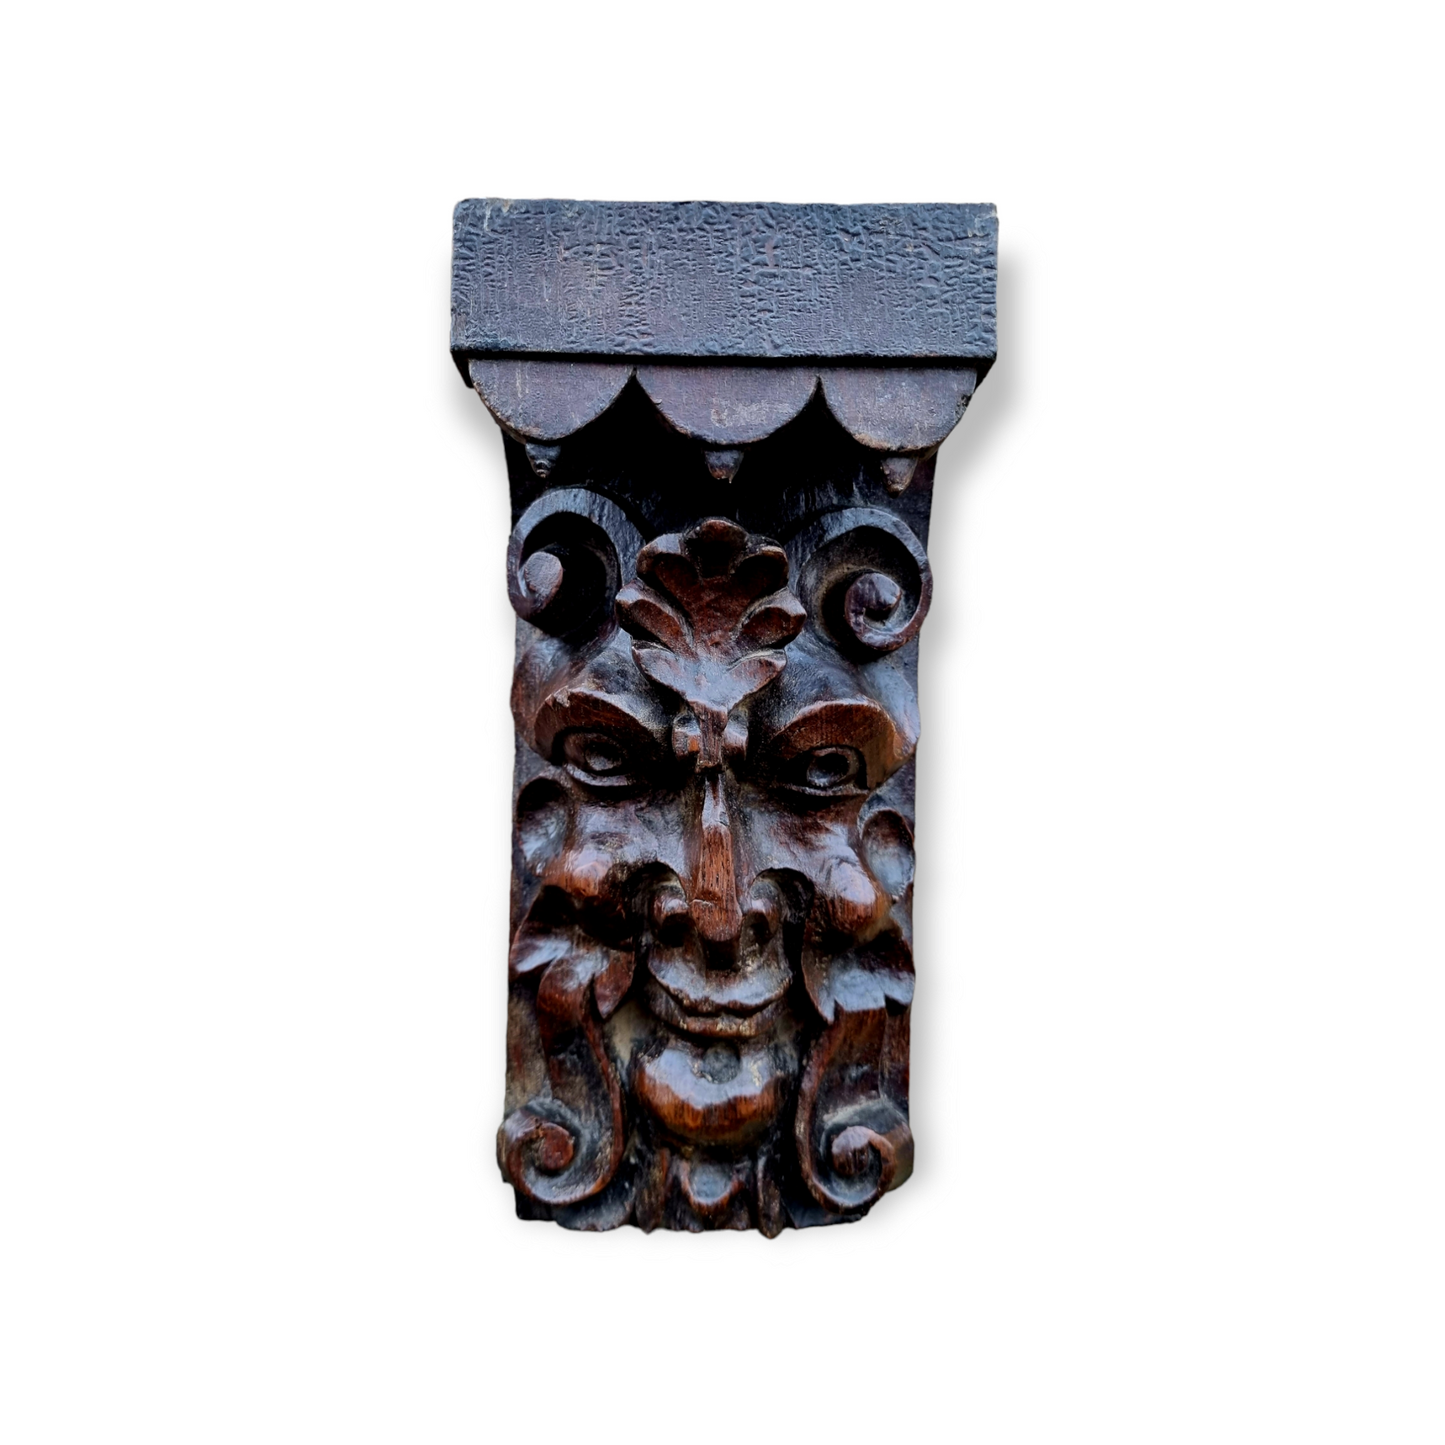 Early 17th Century English Antique Carved Oak Panel / Corbel Depicting a Green Man